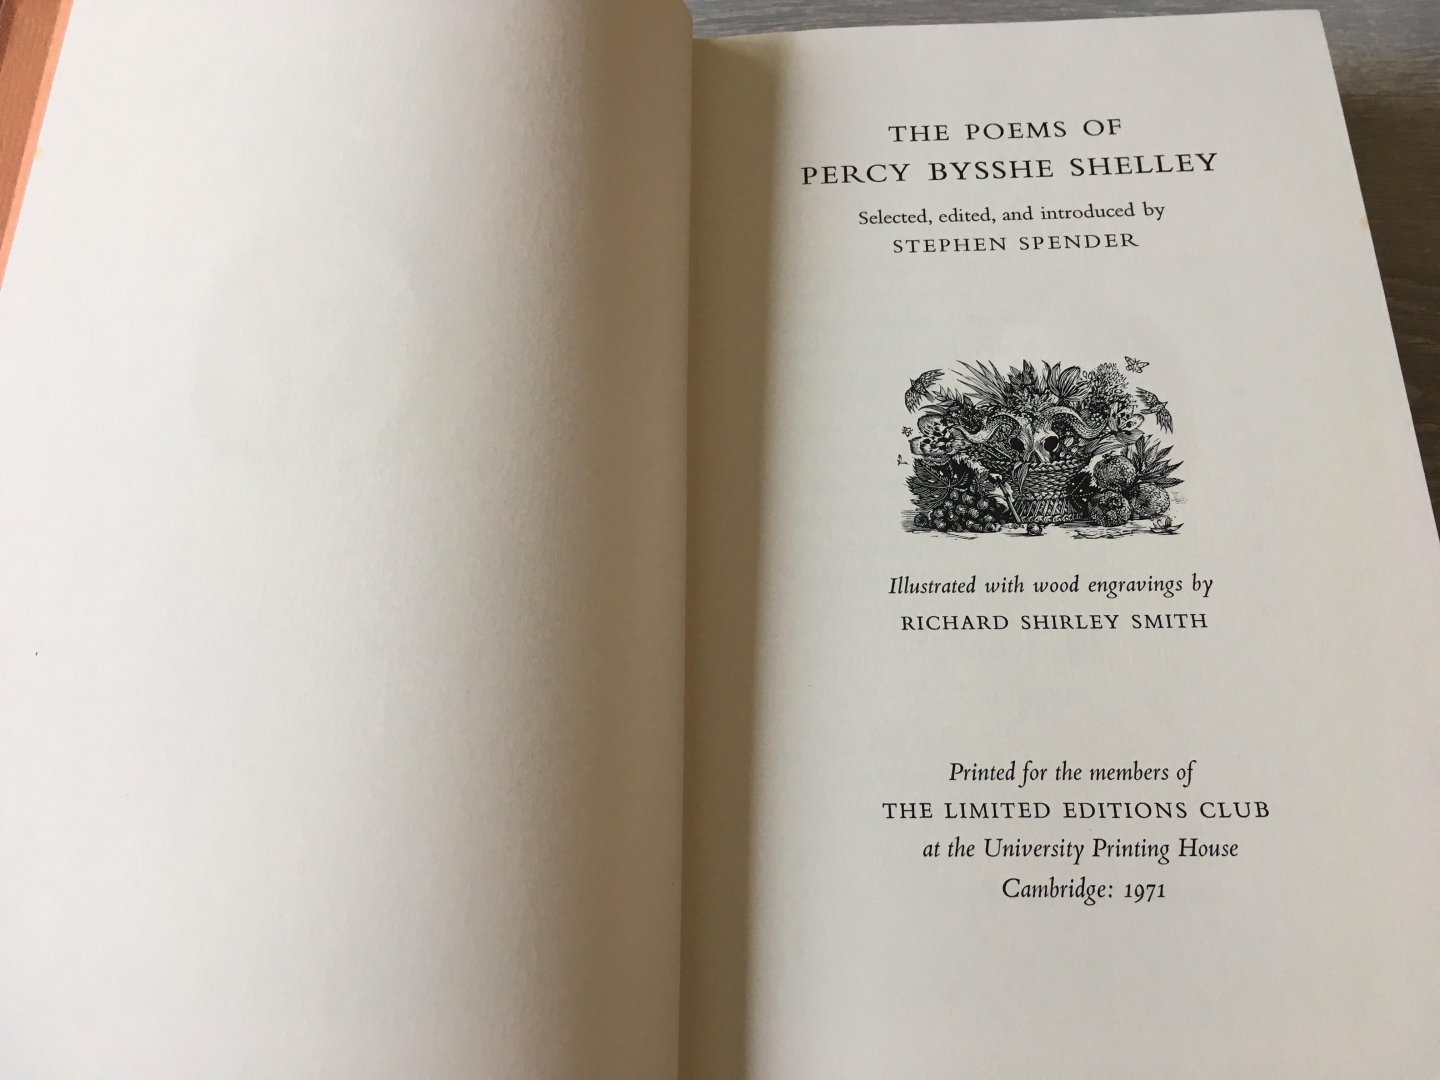 Stephen Spender, Richard Shirley Smith - The Poems of Percy Byssche Shelly